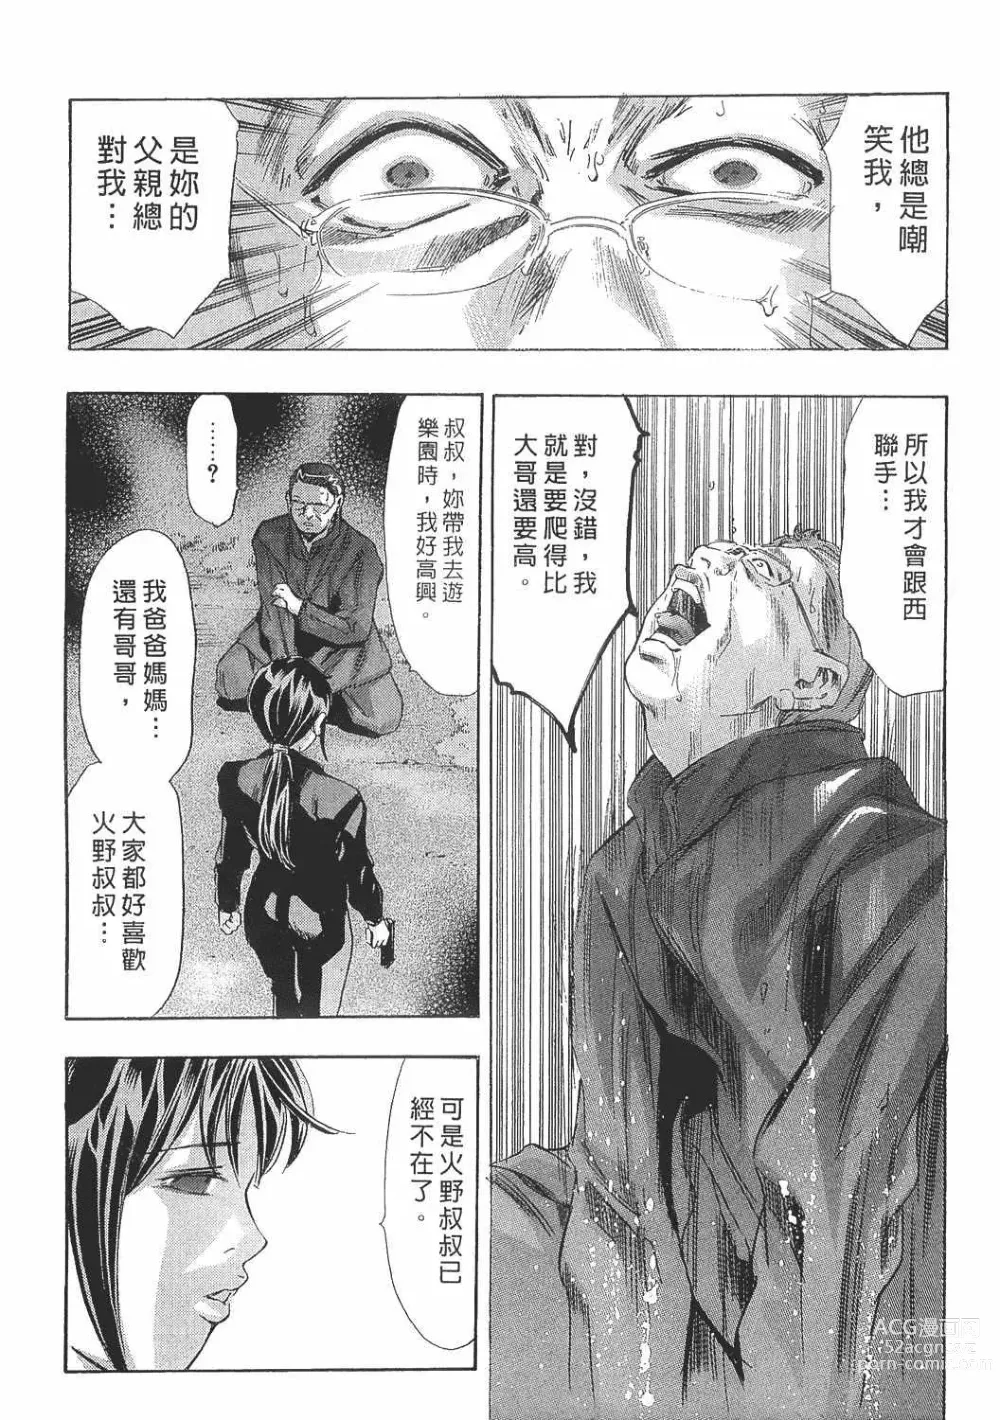 Page 198 of manga Mehyou - Female Panther Vol. 8